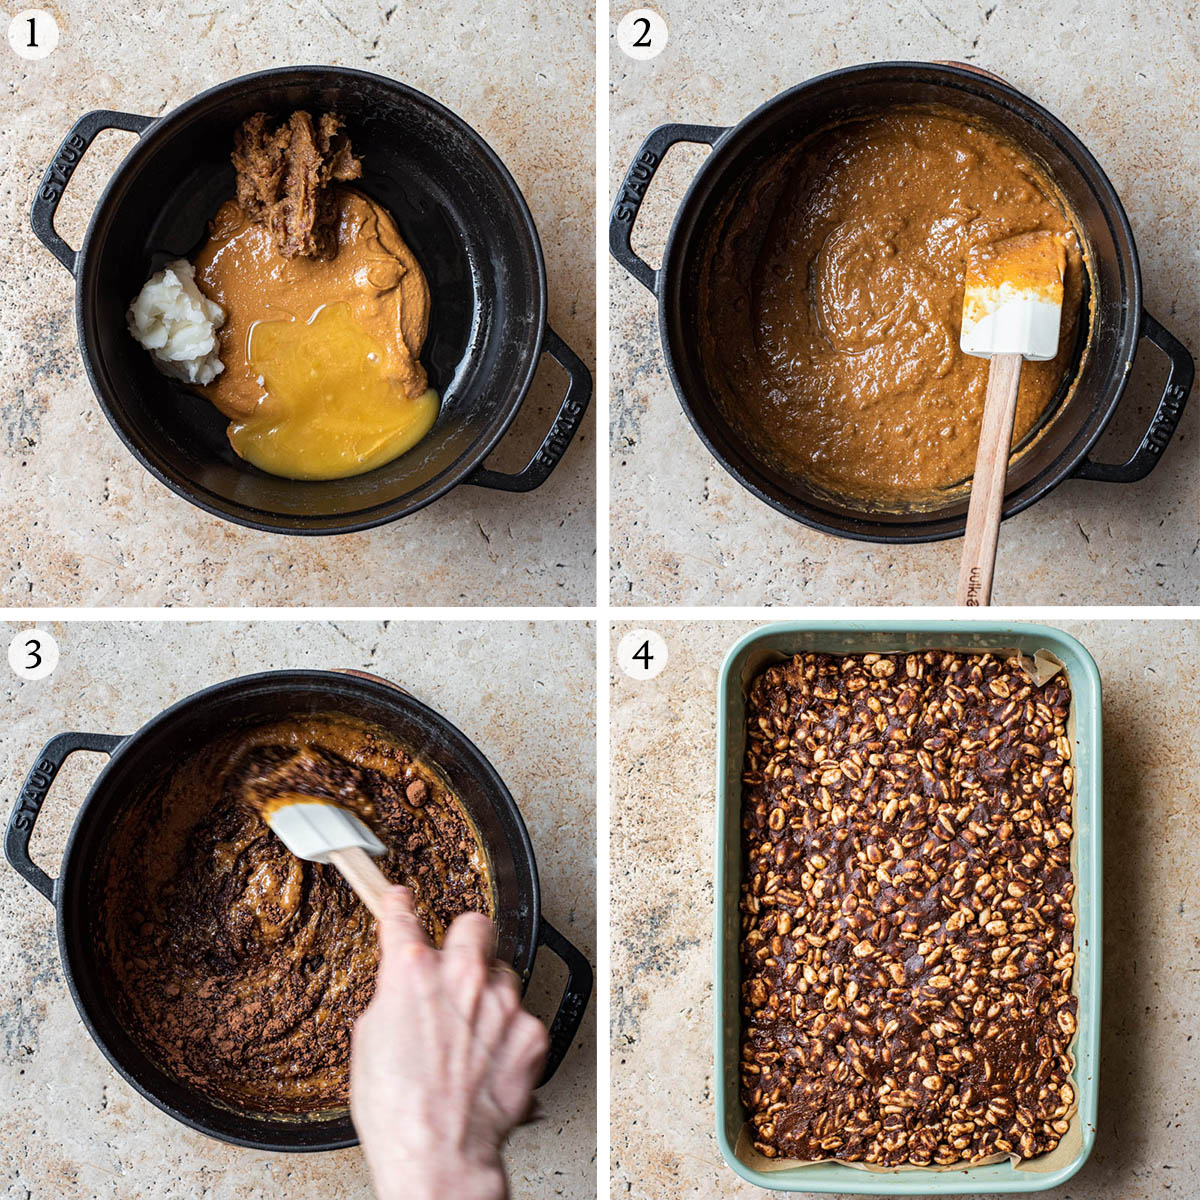 Puffed wheat squares steps 1 to 4.